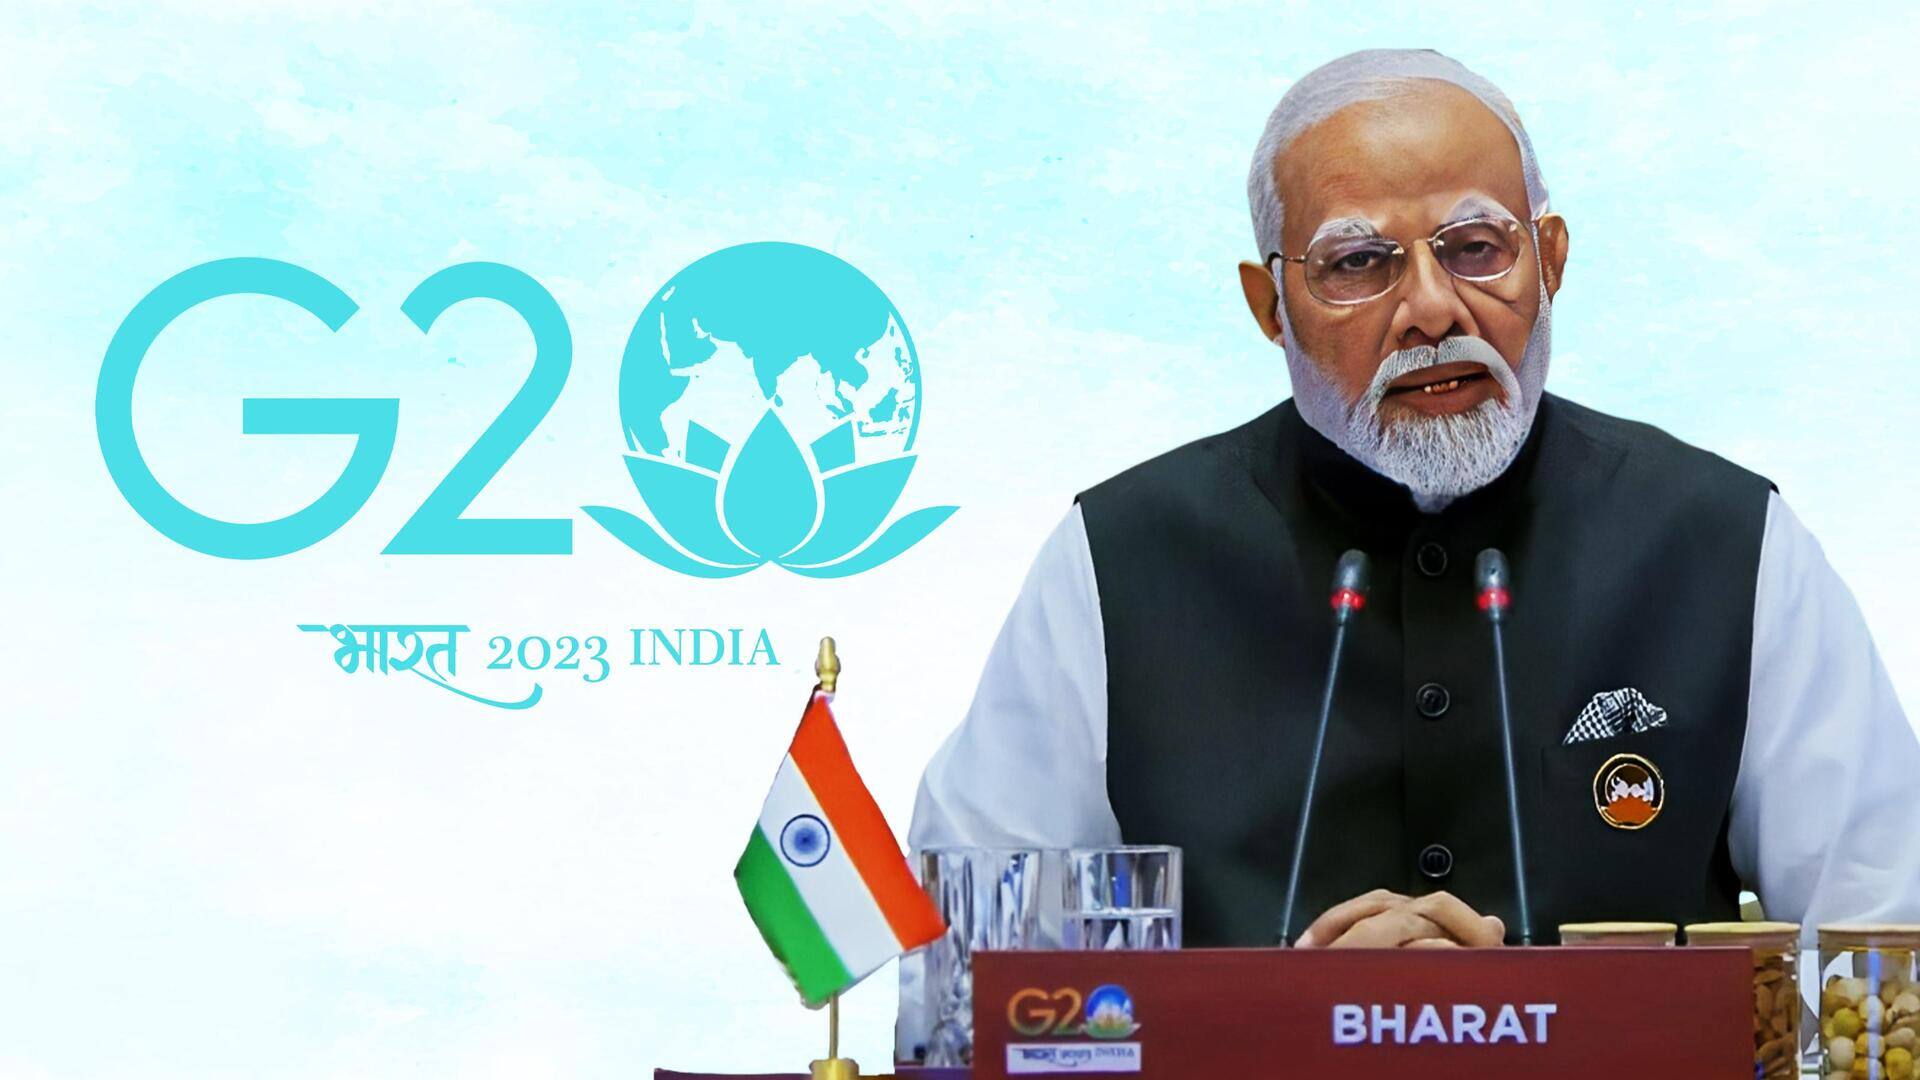 G20 Summit: PM Modi speaks with 'Bharat' placard in front